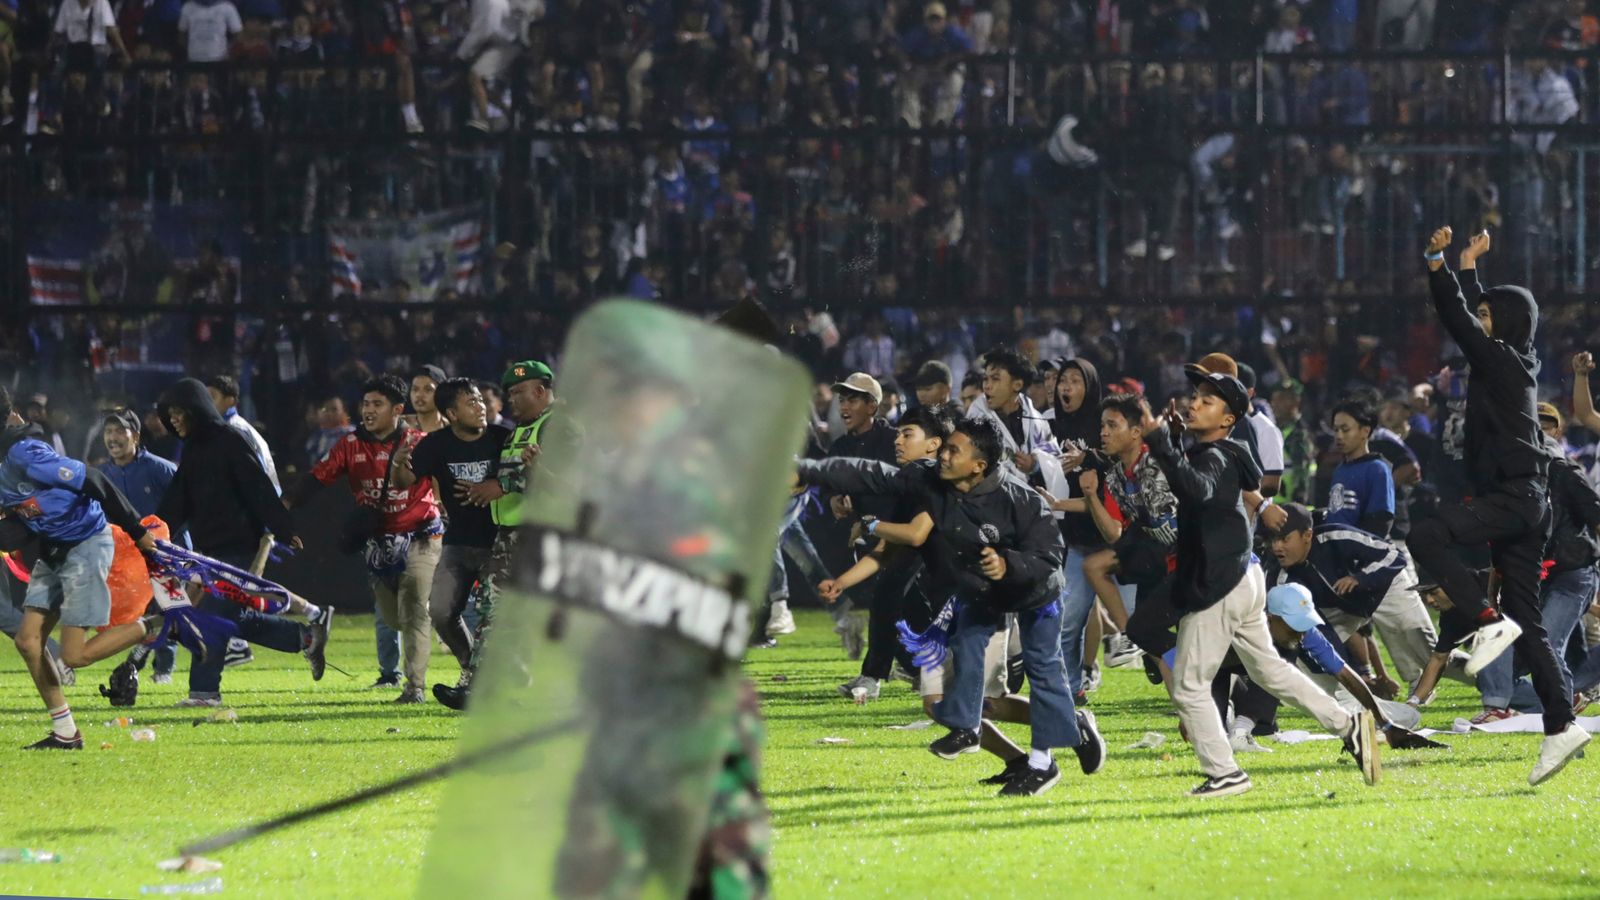 Indonesia football stampede: 32 children among dead as death toll rises